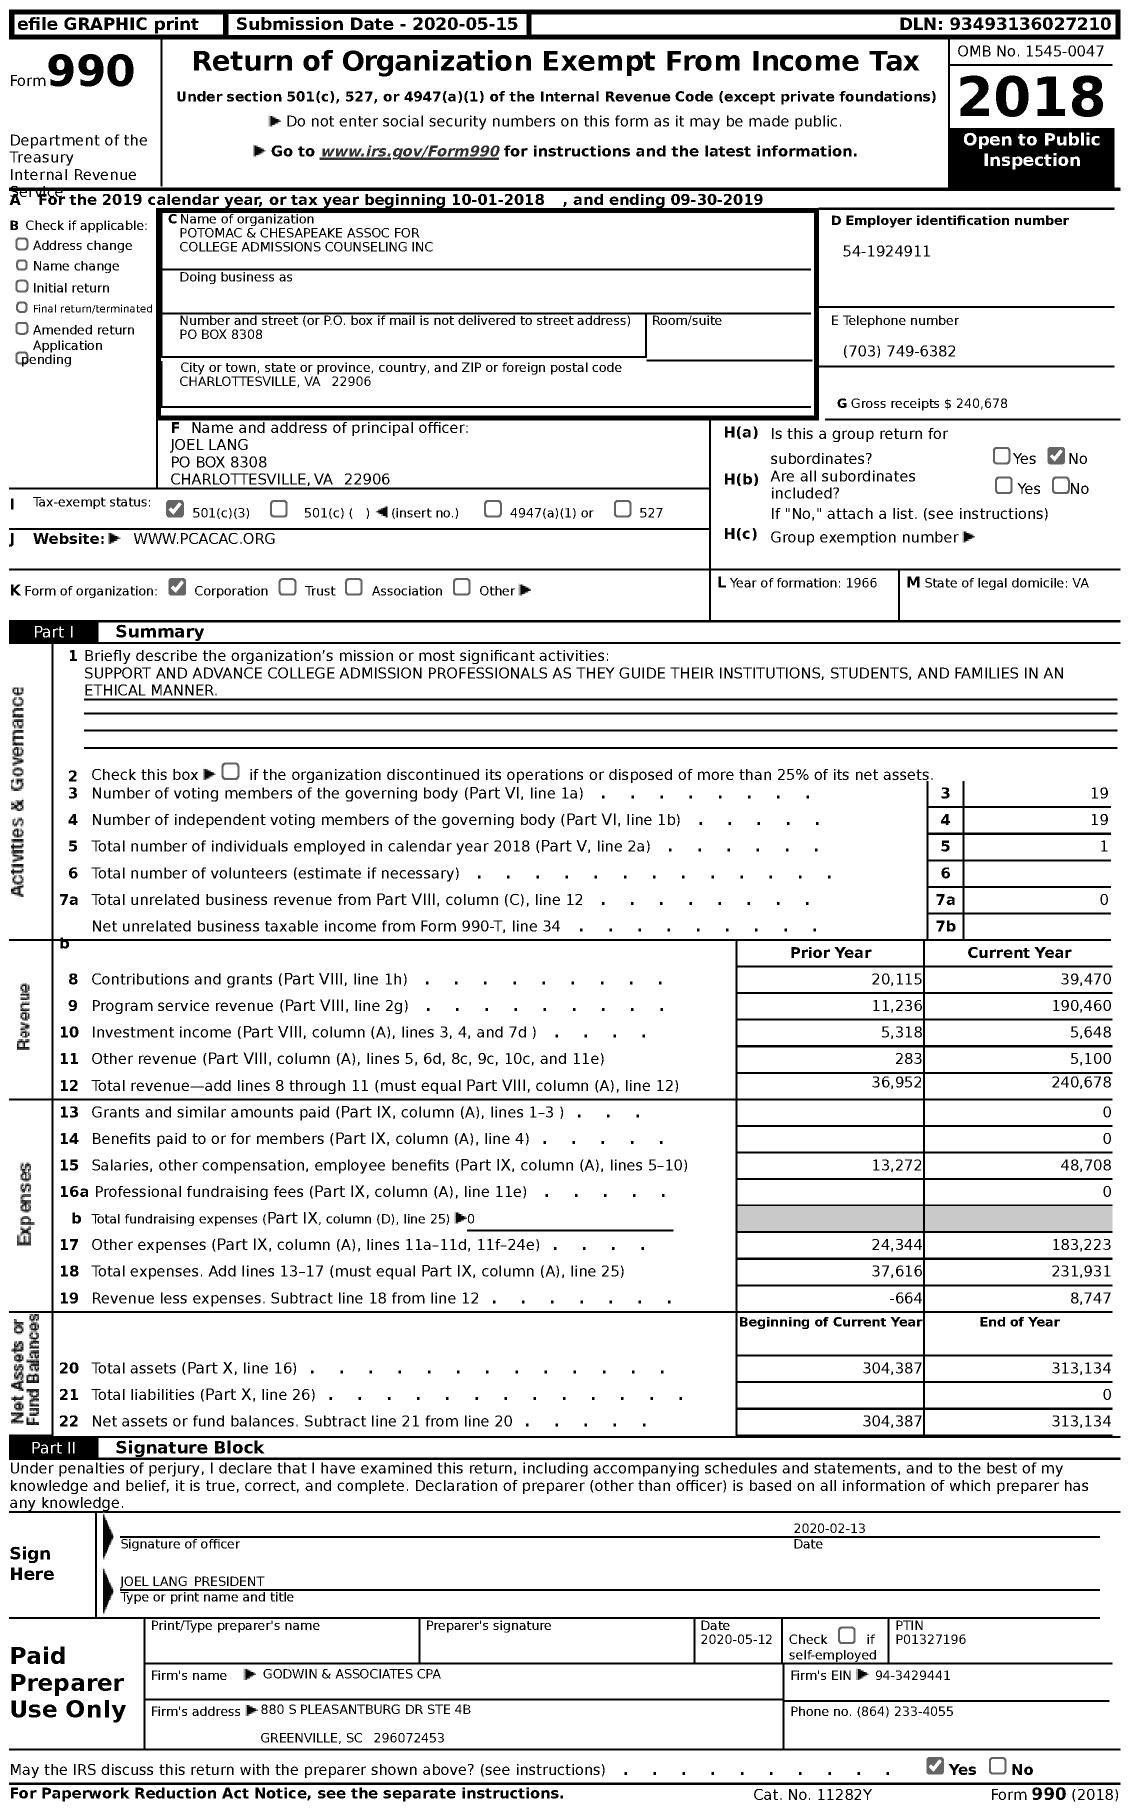 Image of first page of 2018 Form 990 for Potomac and Chesapeake Association for College Admissions Counseling